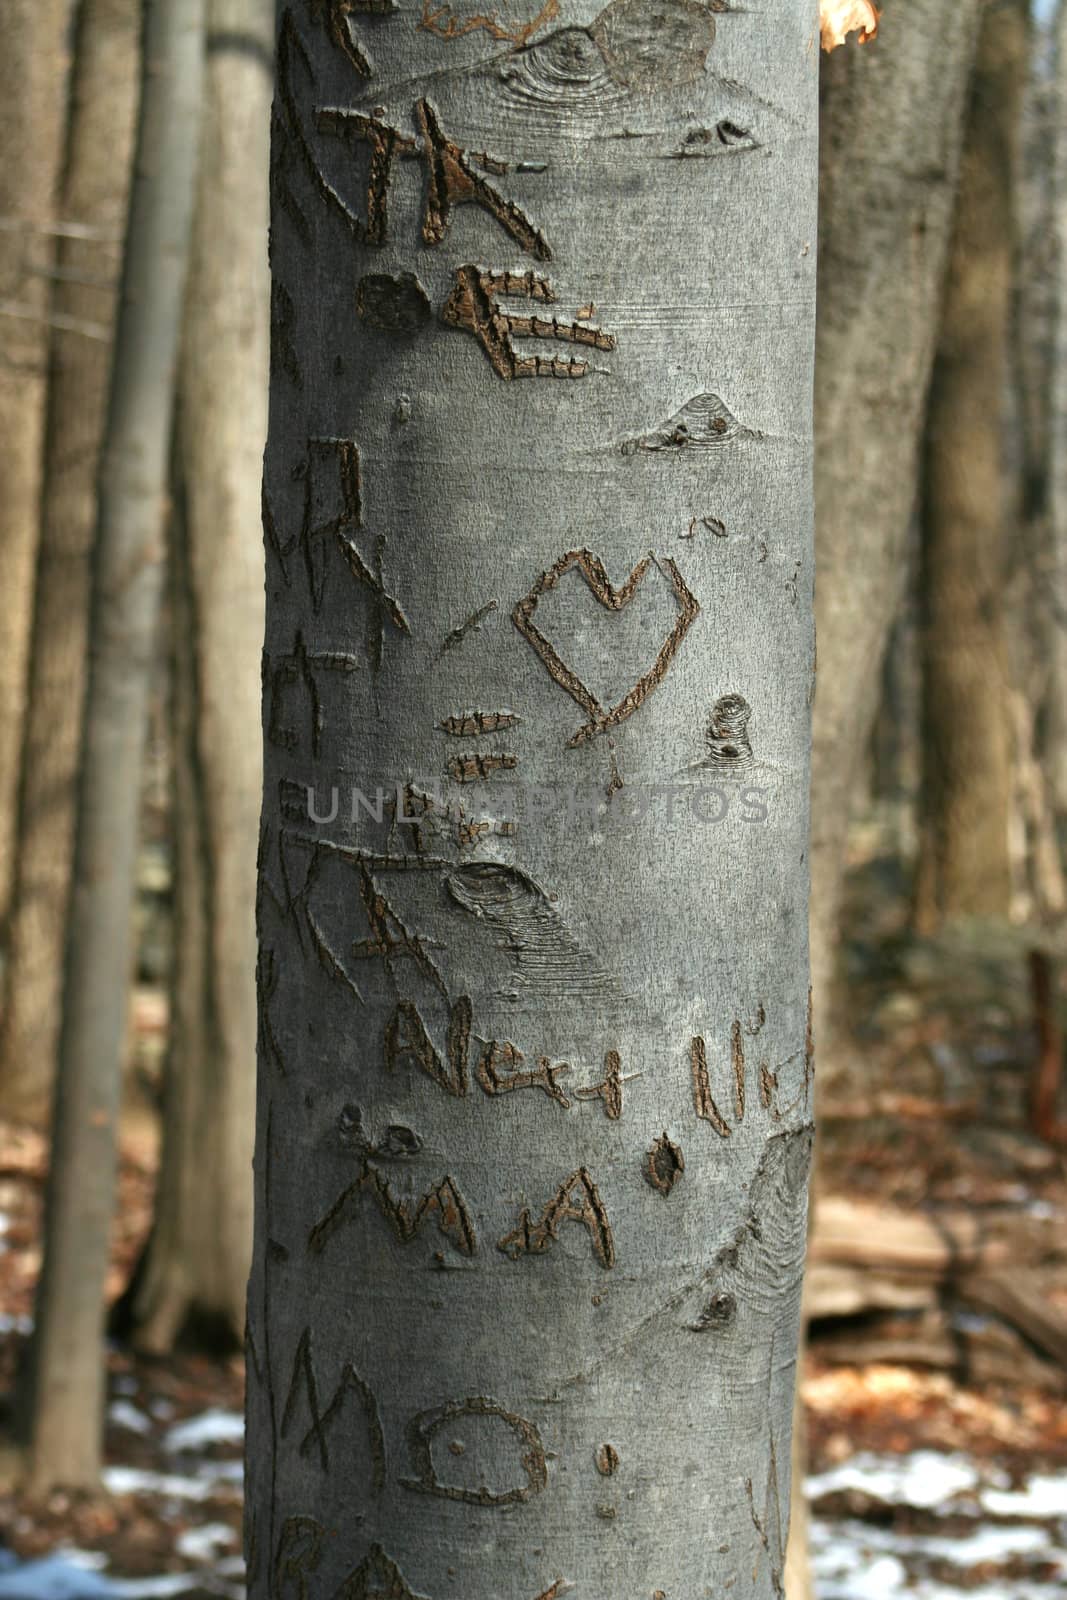 A Carved sweetheart tree in the woods